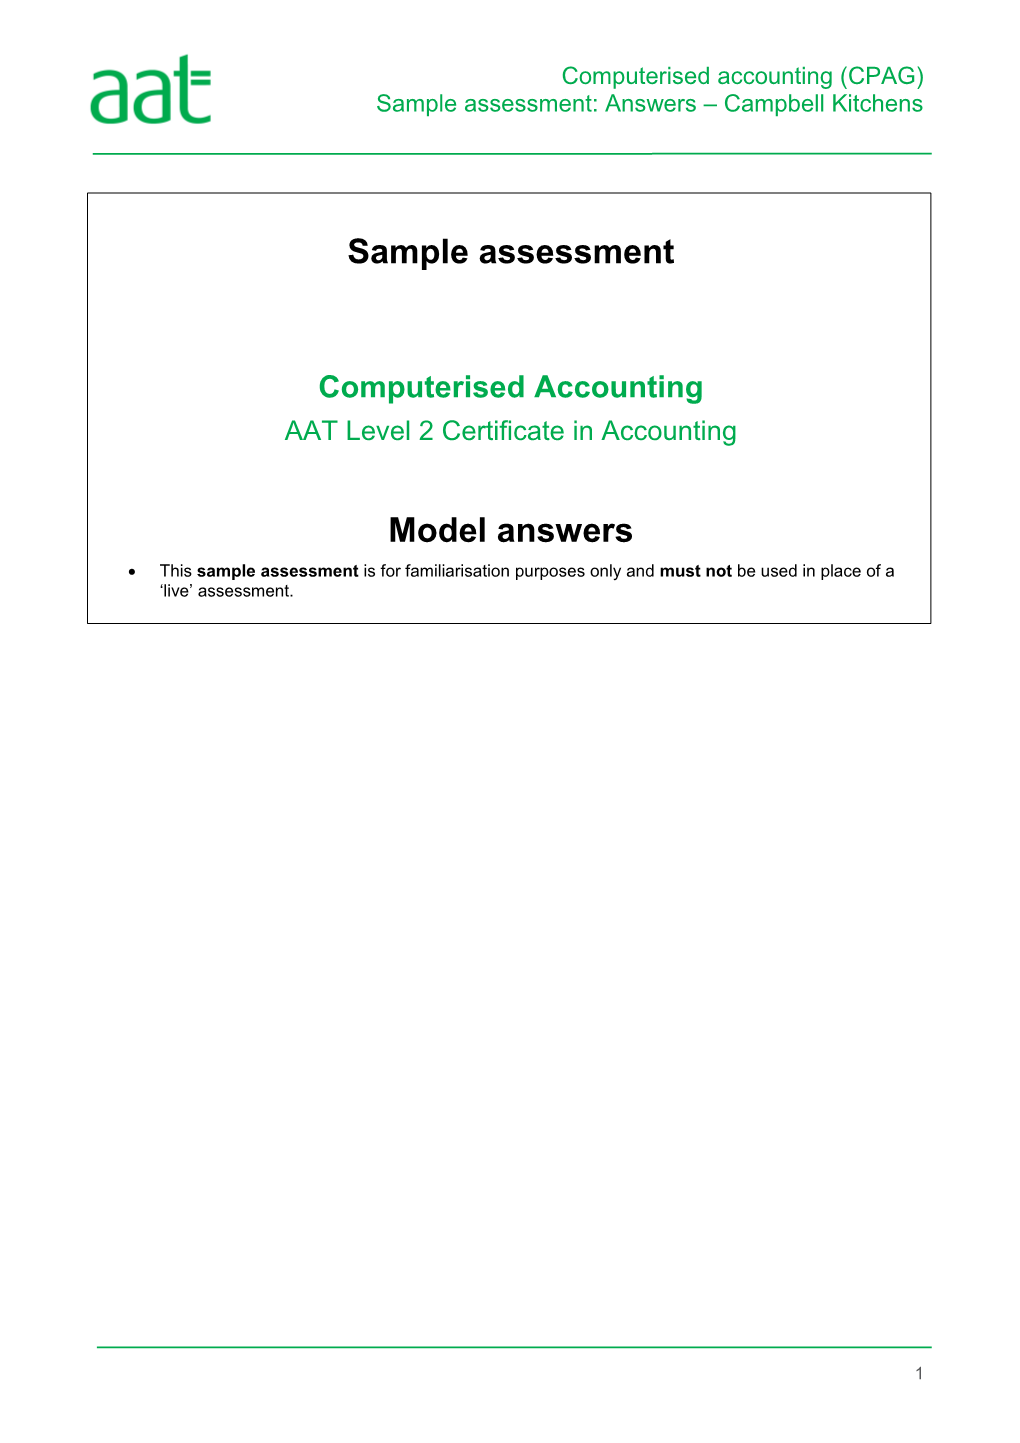 Sample Assessment: Answers Campbell Kitchens